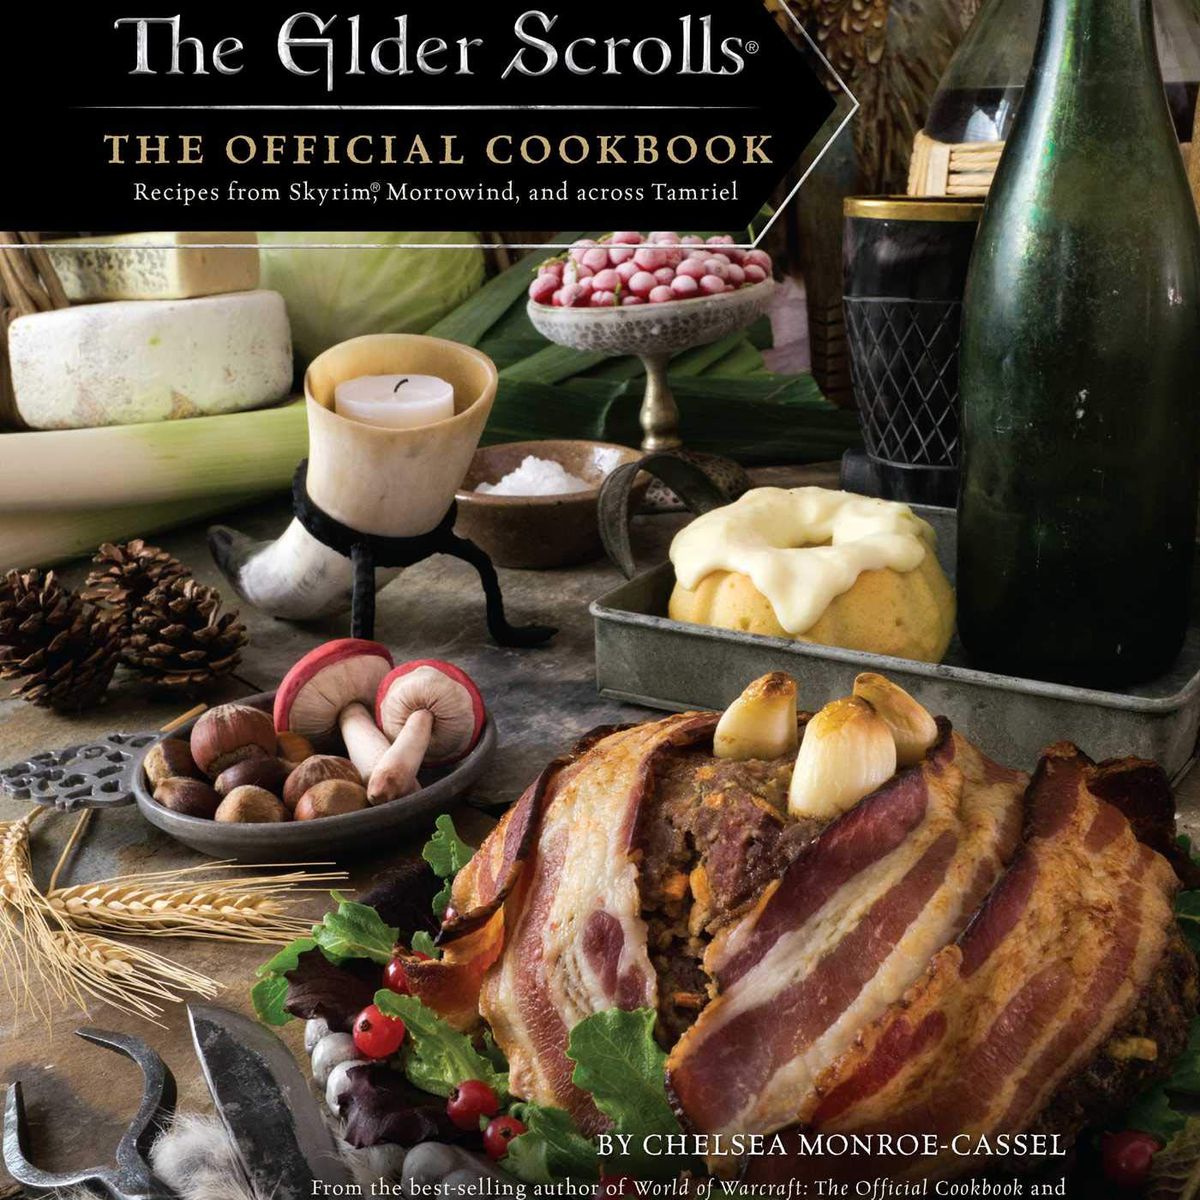 The cover of the Elder Scrolls cookbook